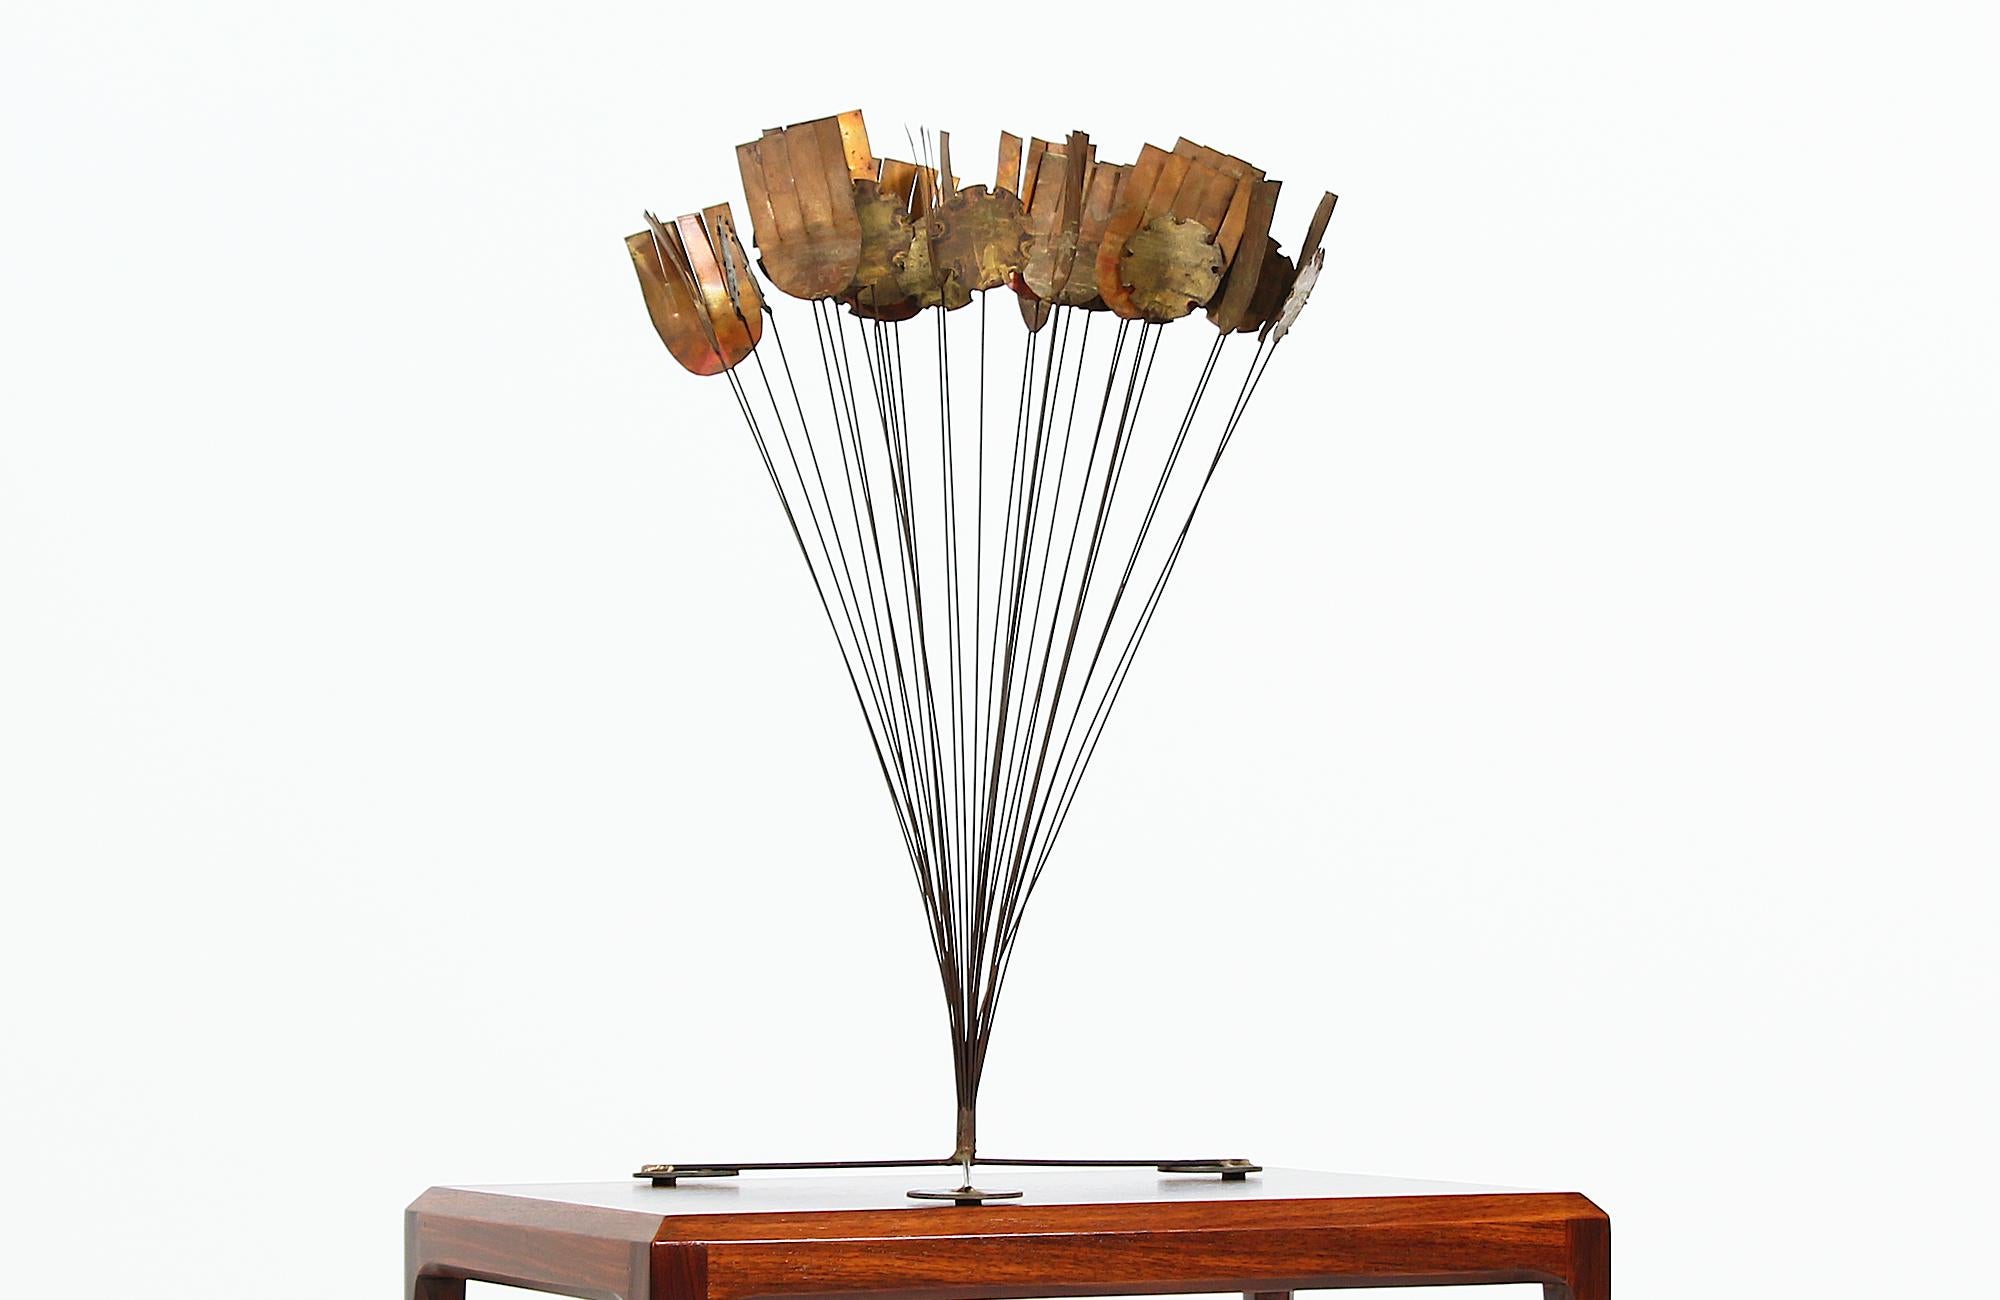 Stunning Brutalist sculpture designed and manufactured in the United States circa 1970s. This sculpture is the perfect example of midcentury Brutalist design featuring various brass shapes resembling flowers mounted atop thin metal rods. It is